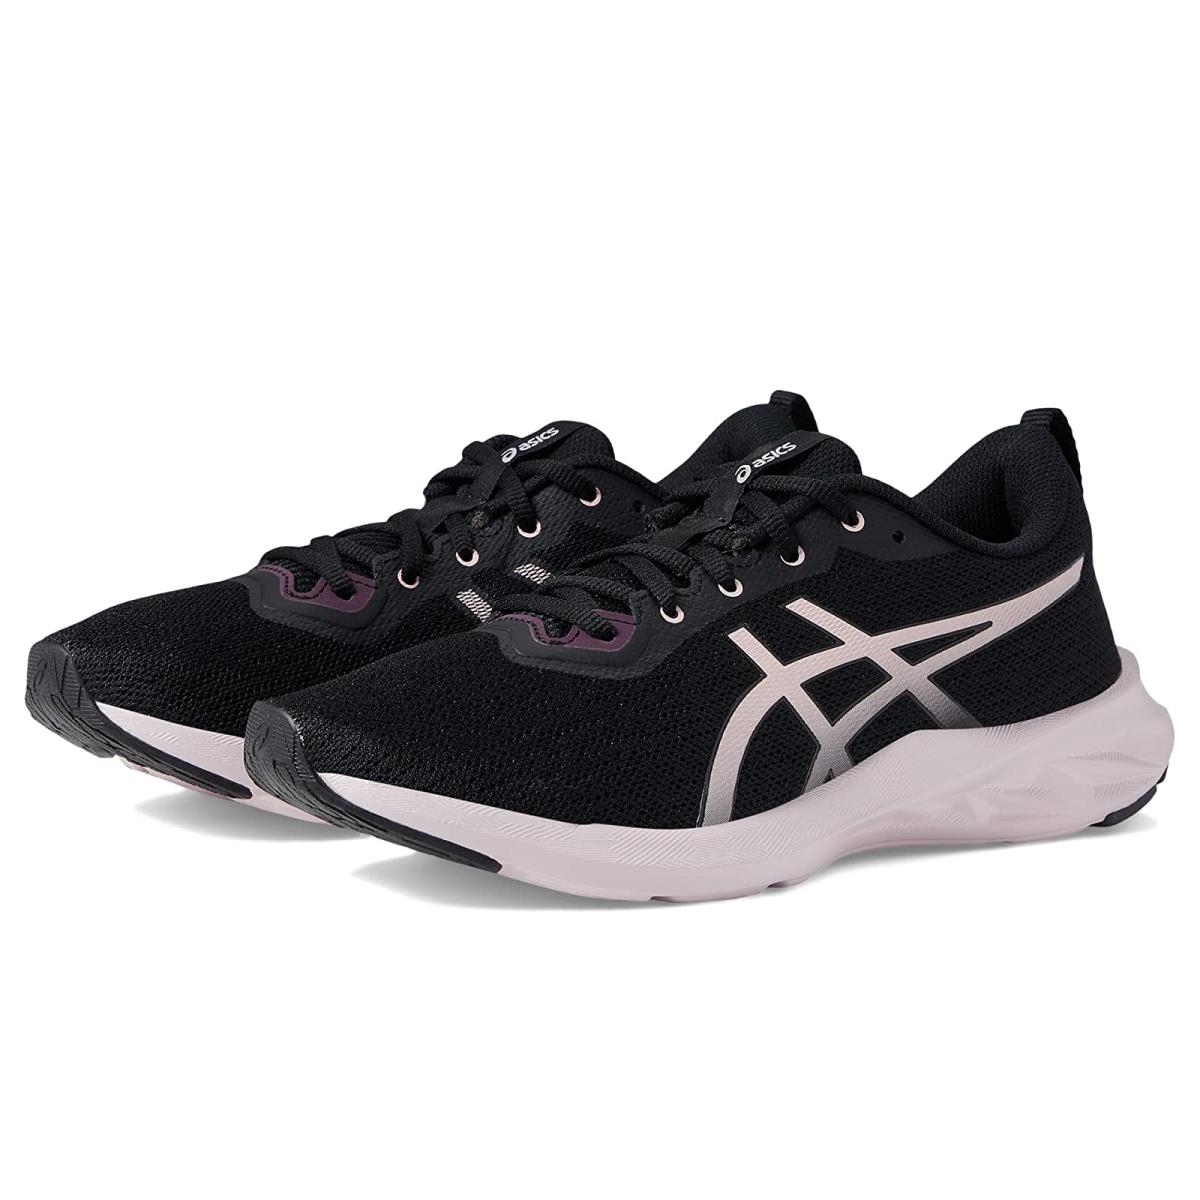 Woman`s Sneakers Athletic Shoes Asics Versablast 2 Black/Barely Rose